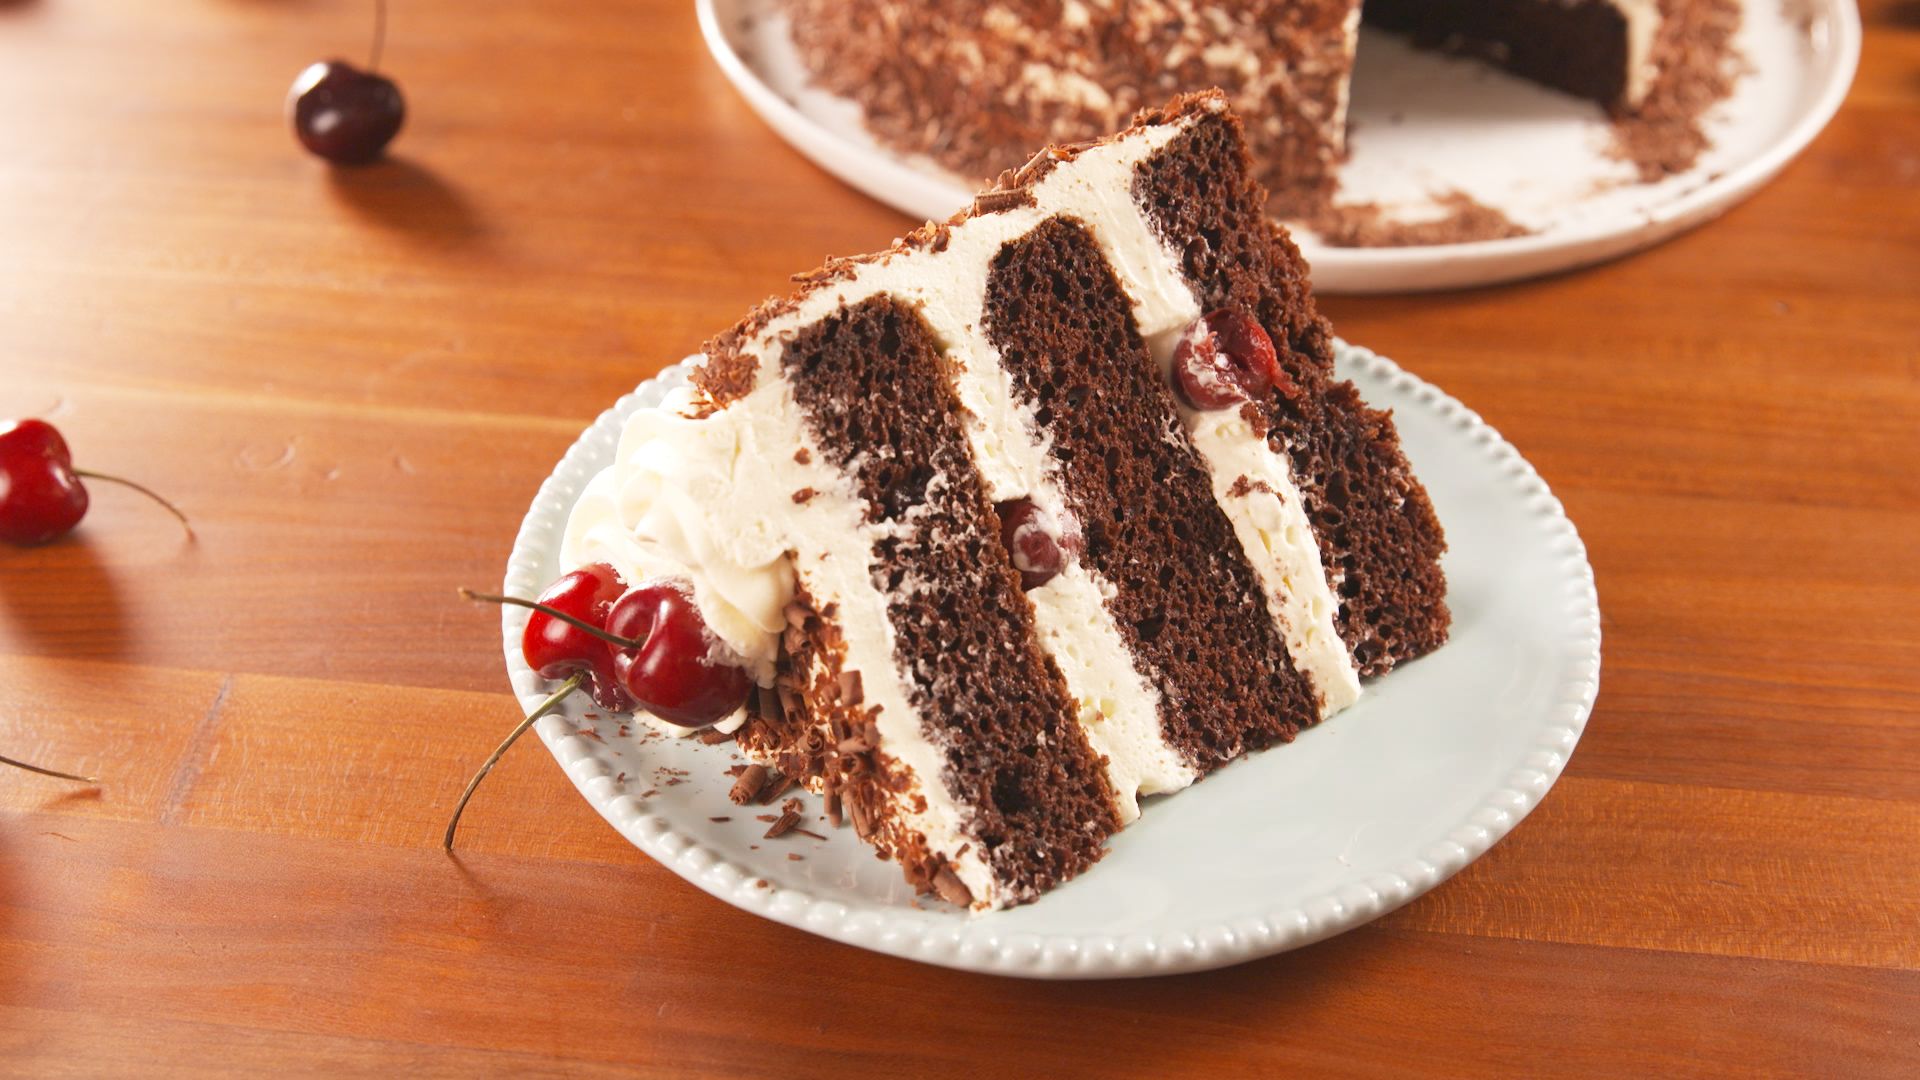 Best Black Forest Cake Recipe - How To Make Black Forest Cake